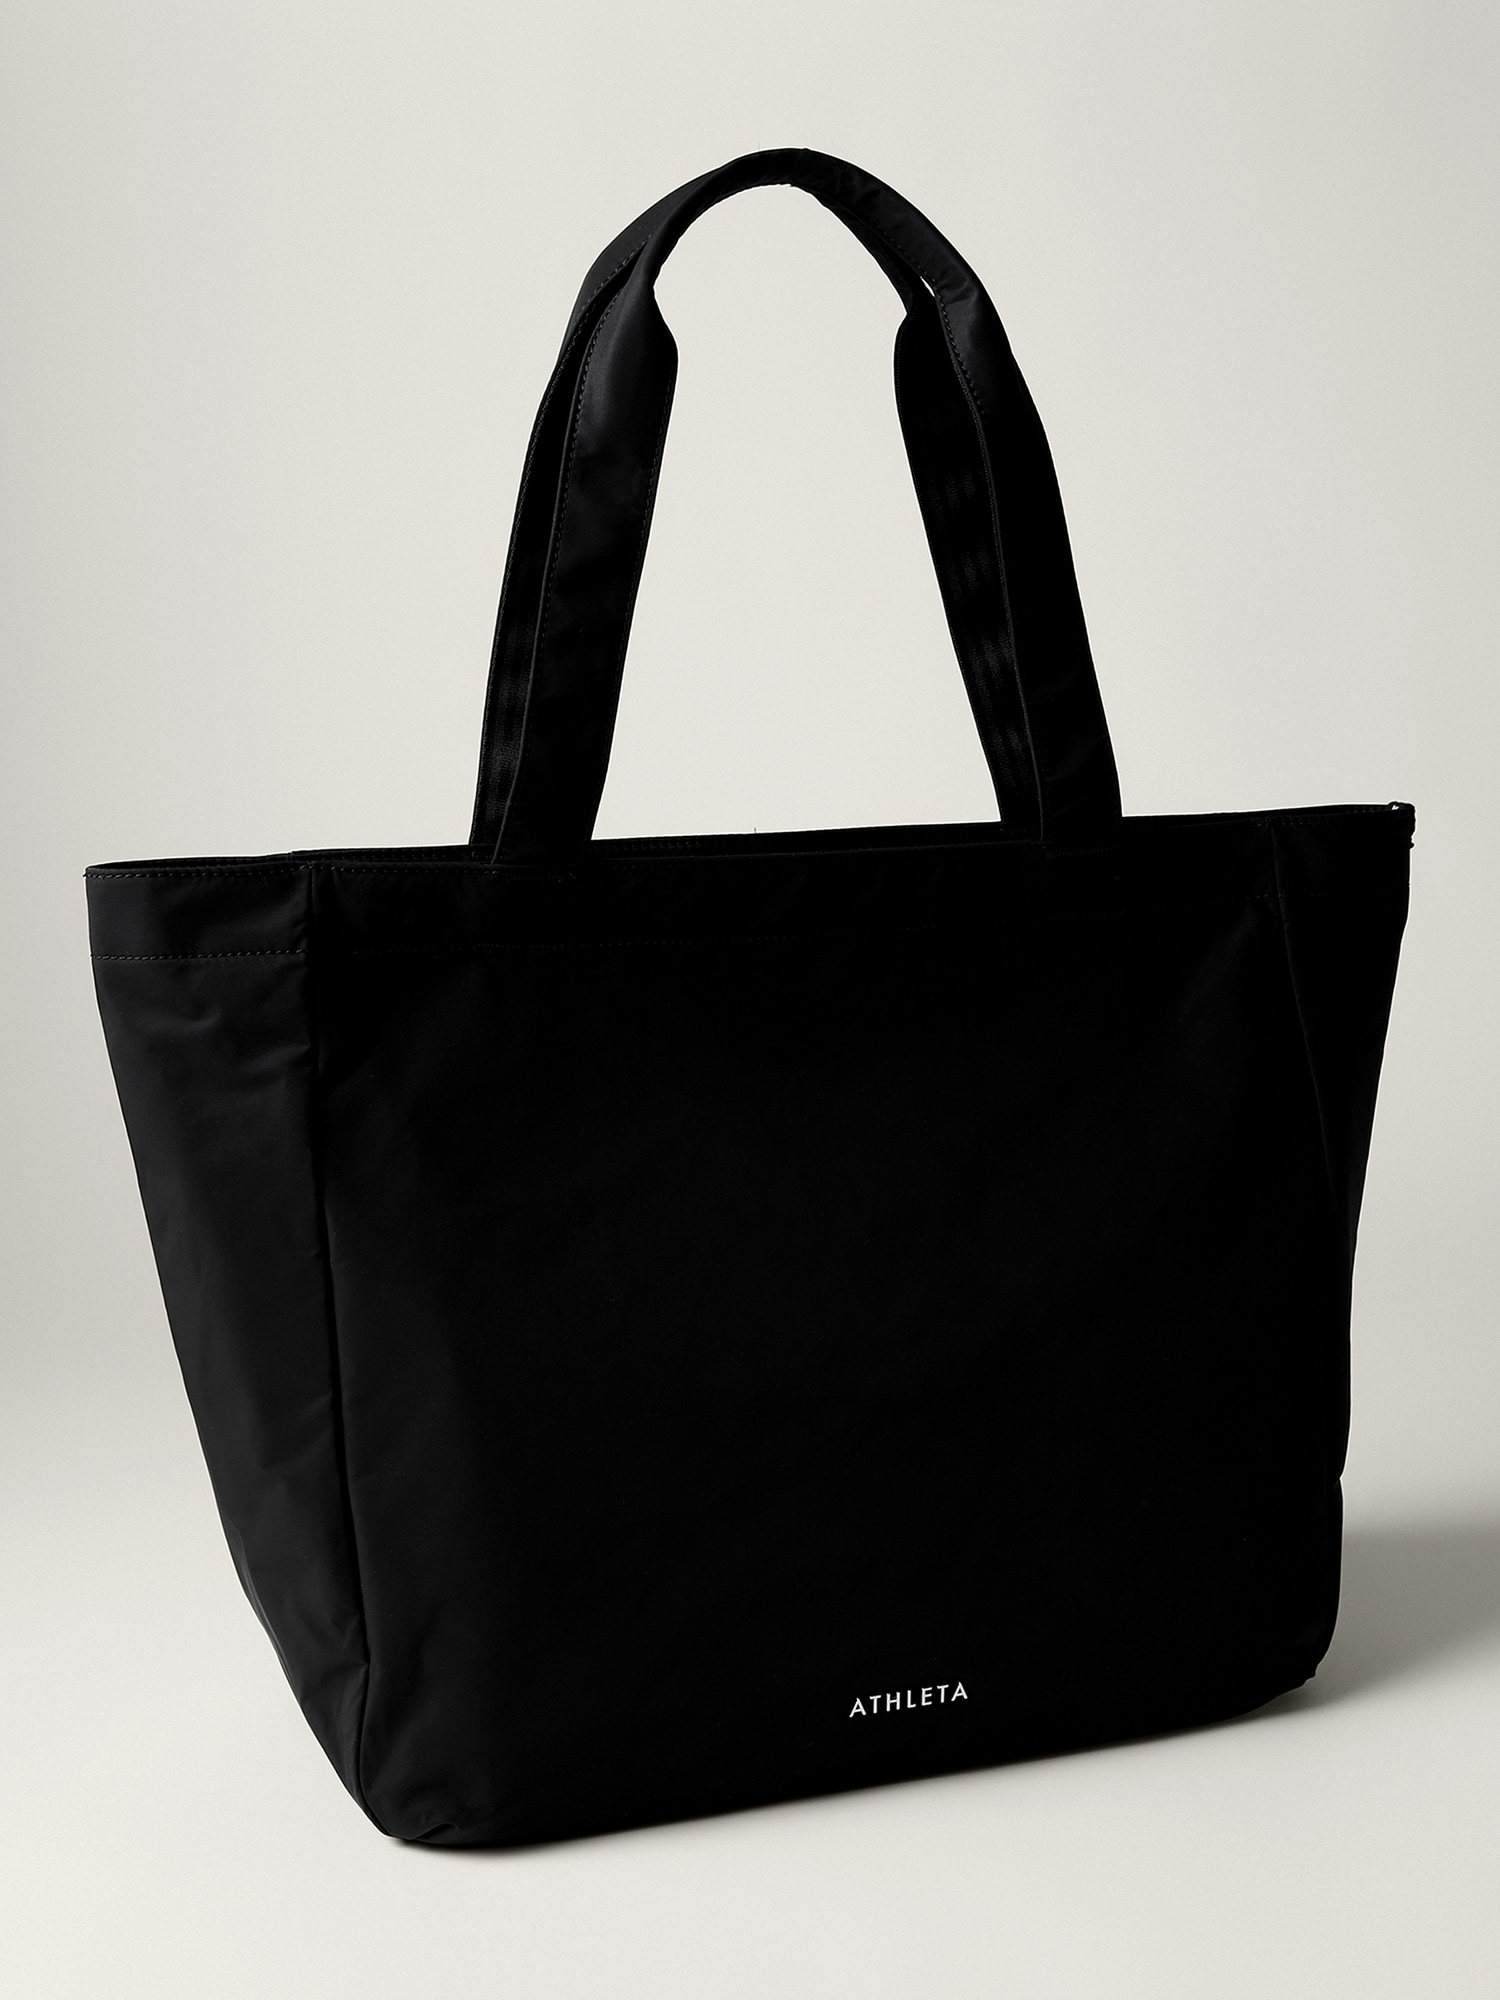 Athleta All About Tote Bag In Black